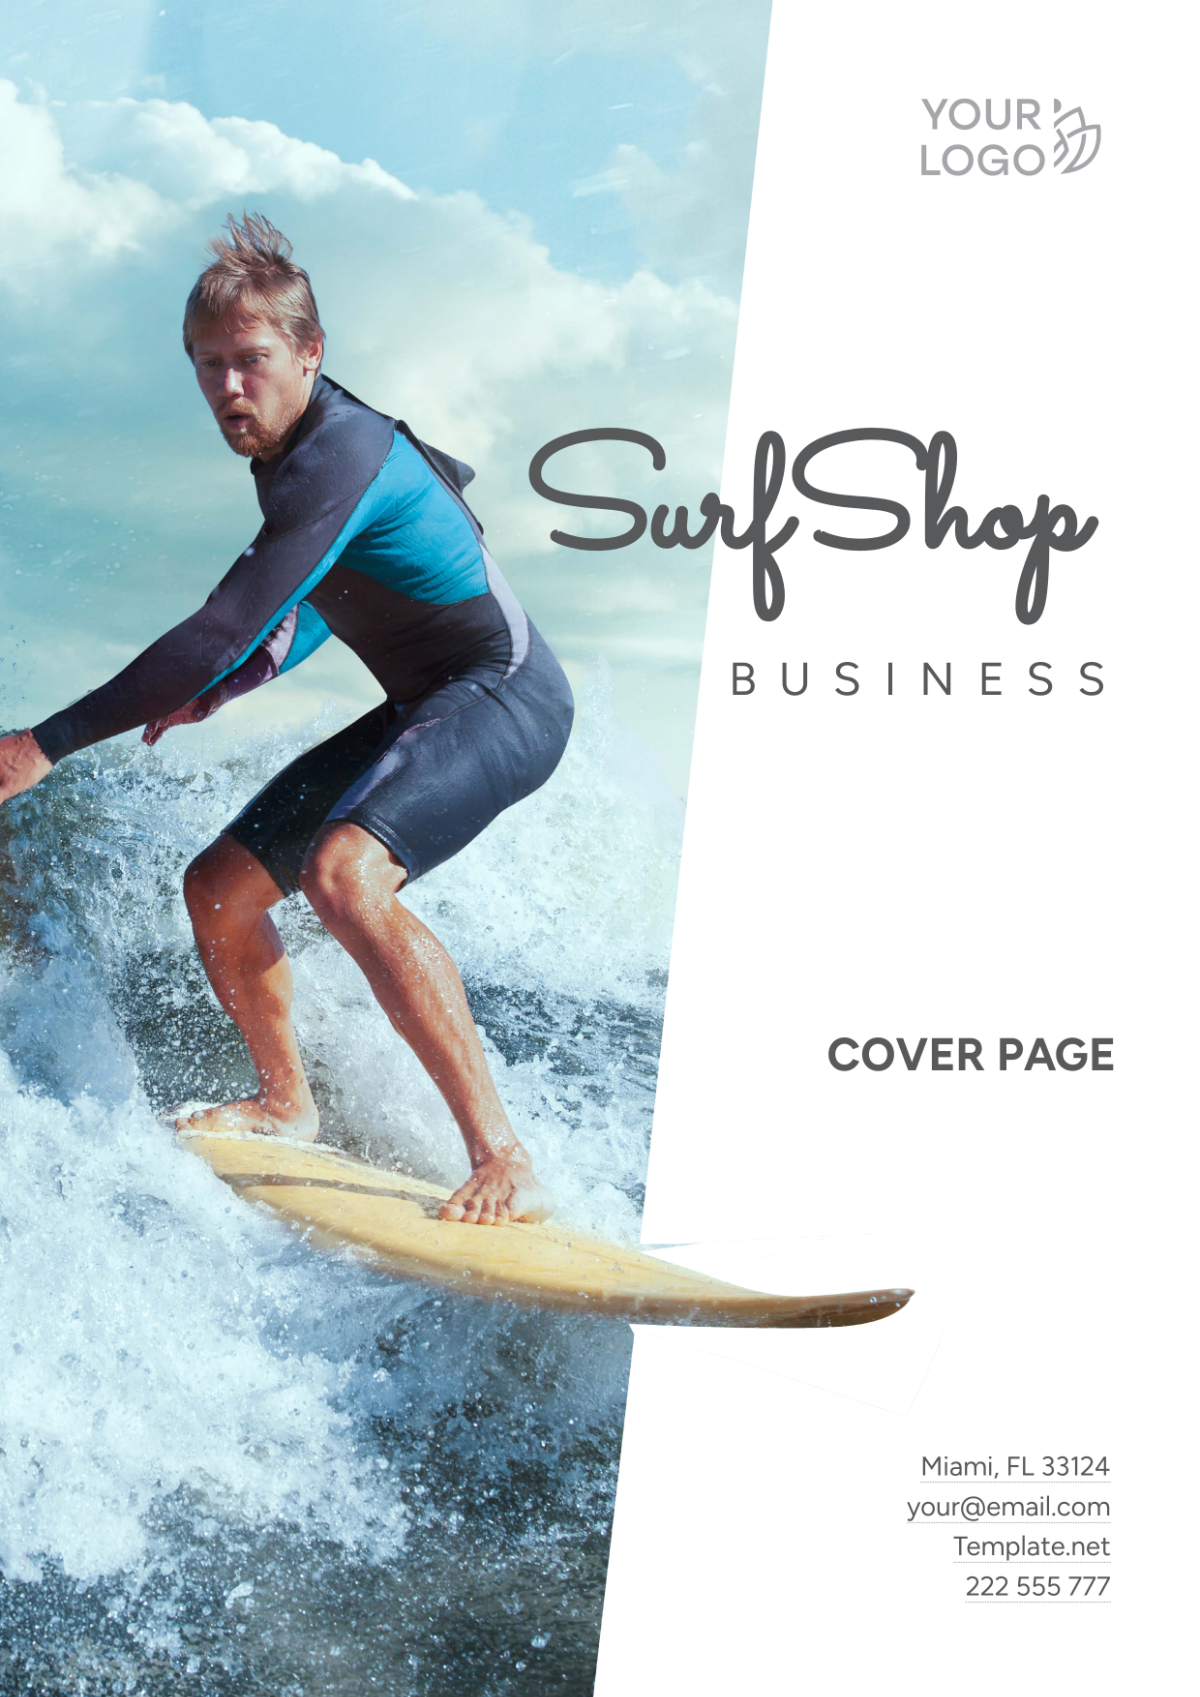 Surf Shop Business Cover Page